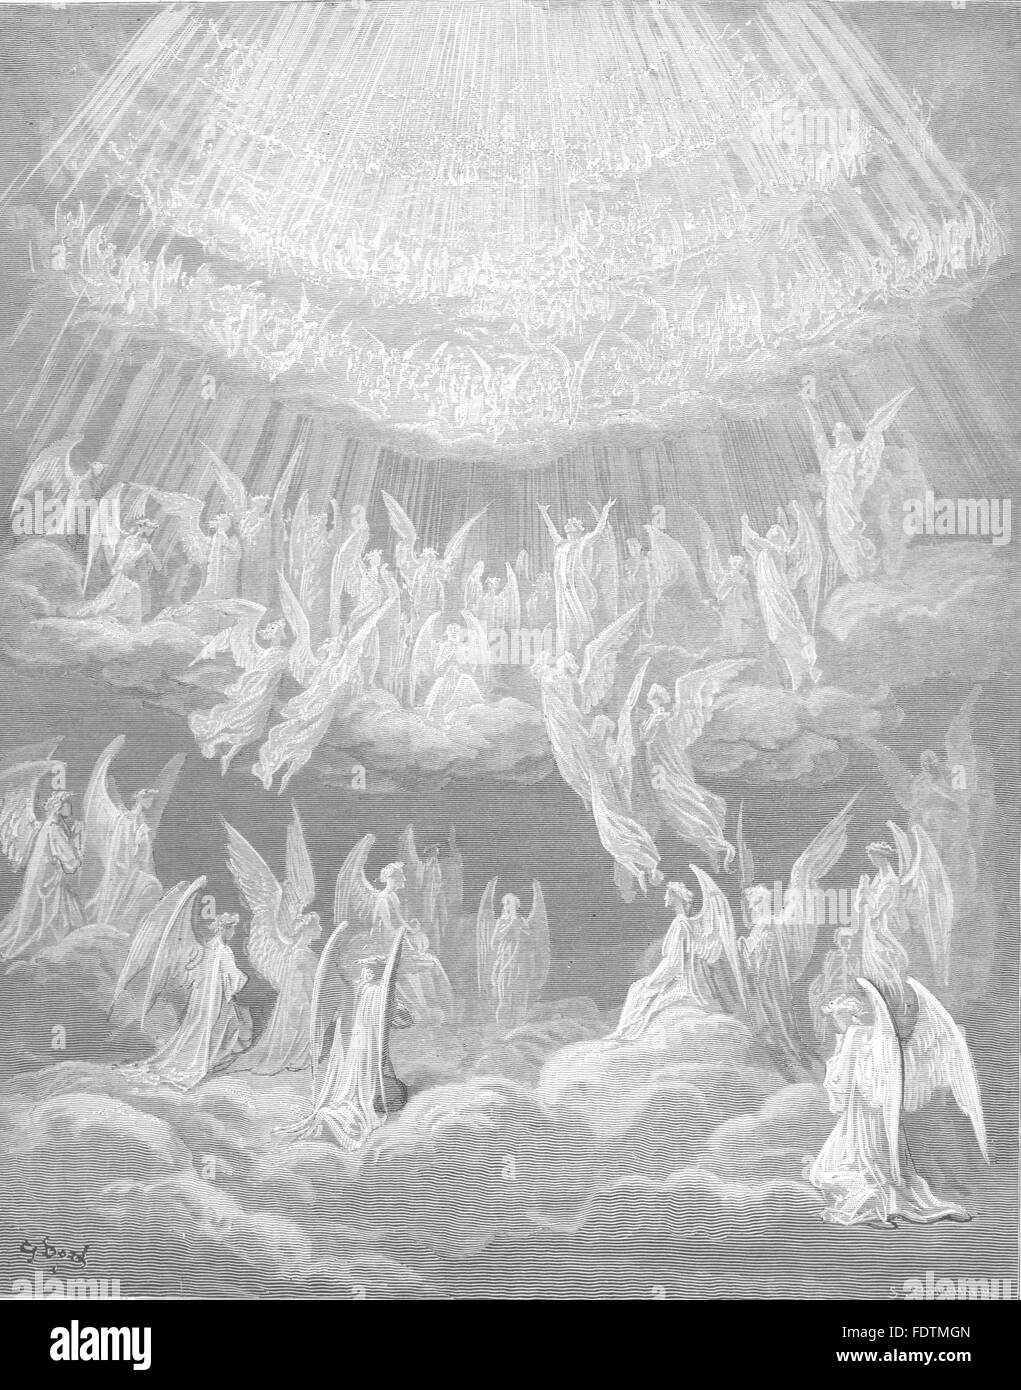 DANTE:Then Glory father,son Holy spirit,rang aloud throughout all paradise, 1893 Stock Photo